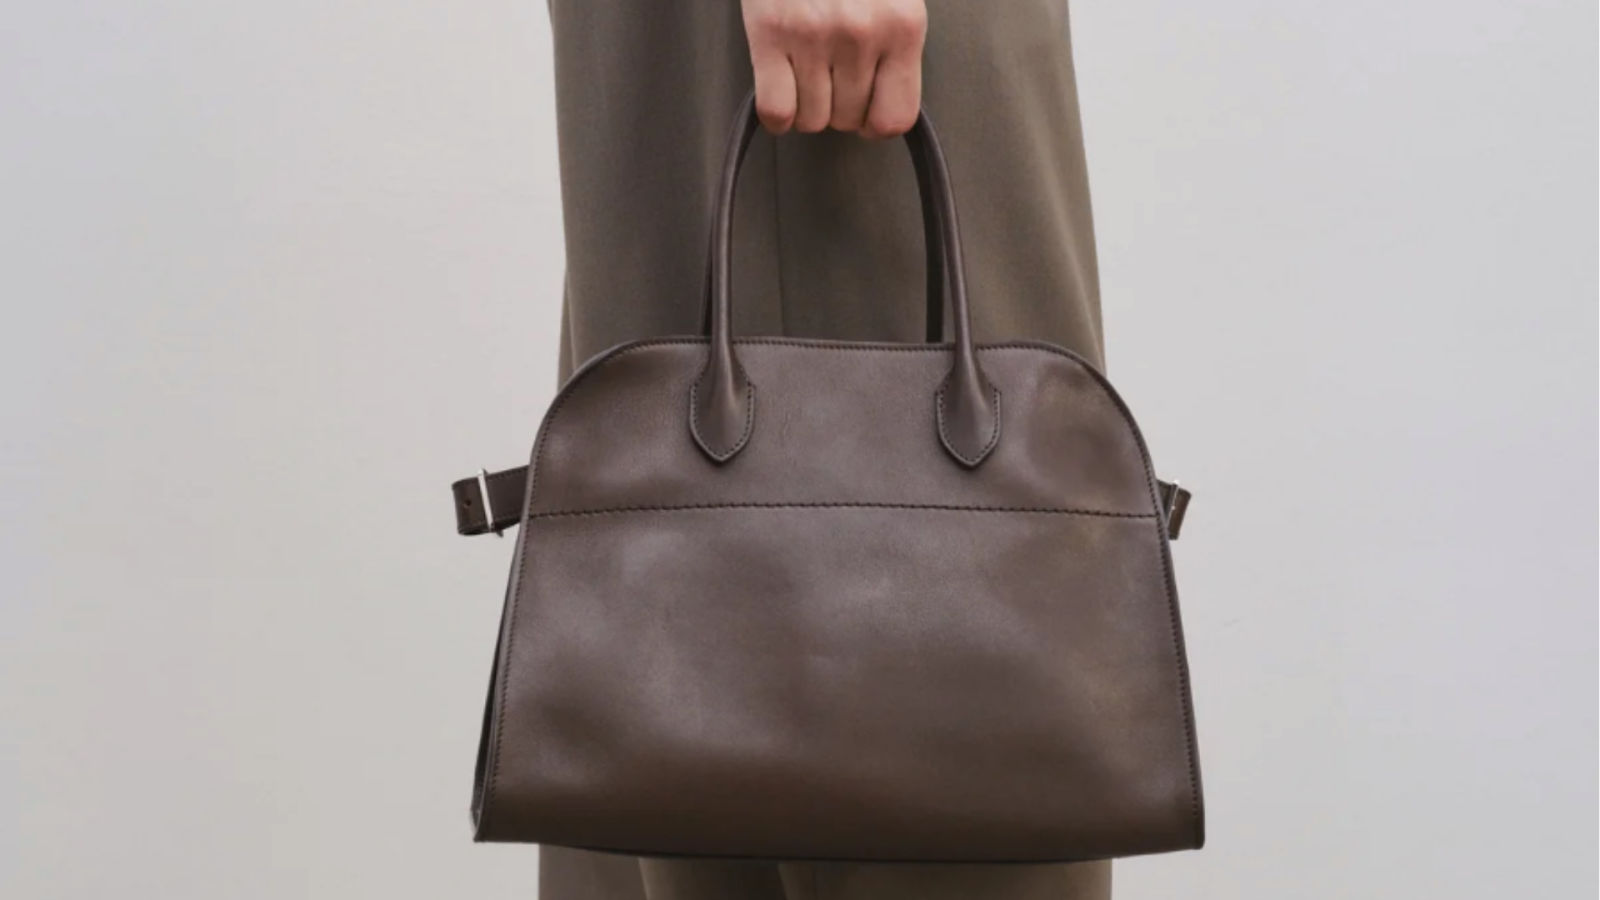 Everything you need to know about the Margaux bag by The Row